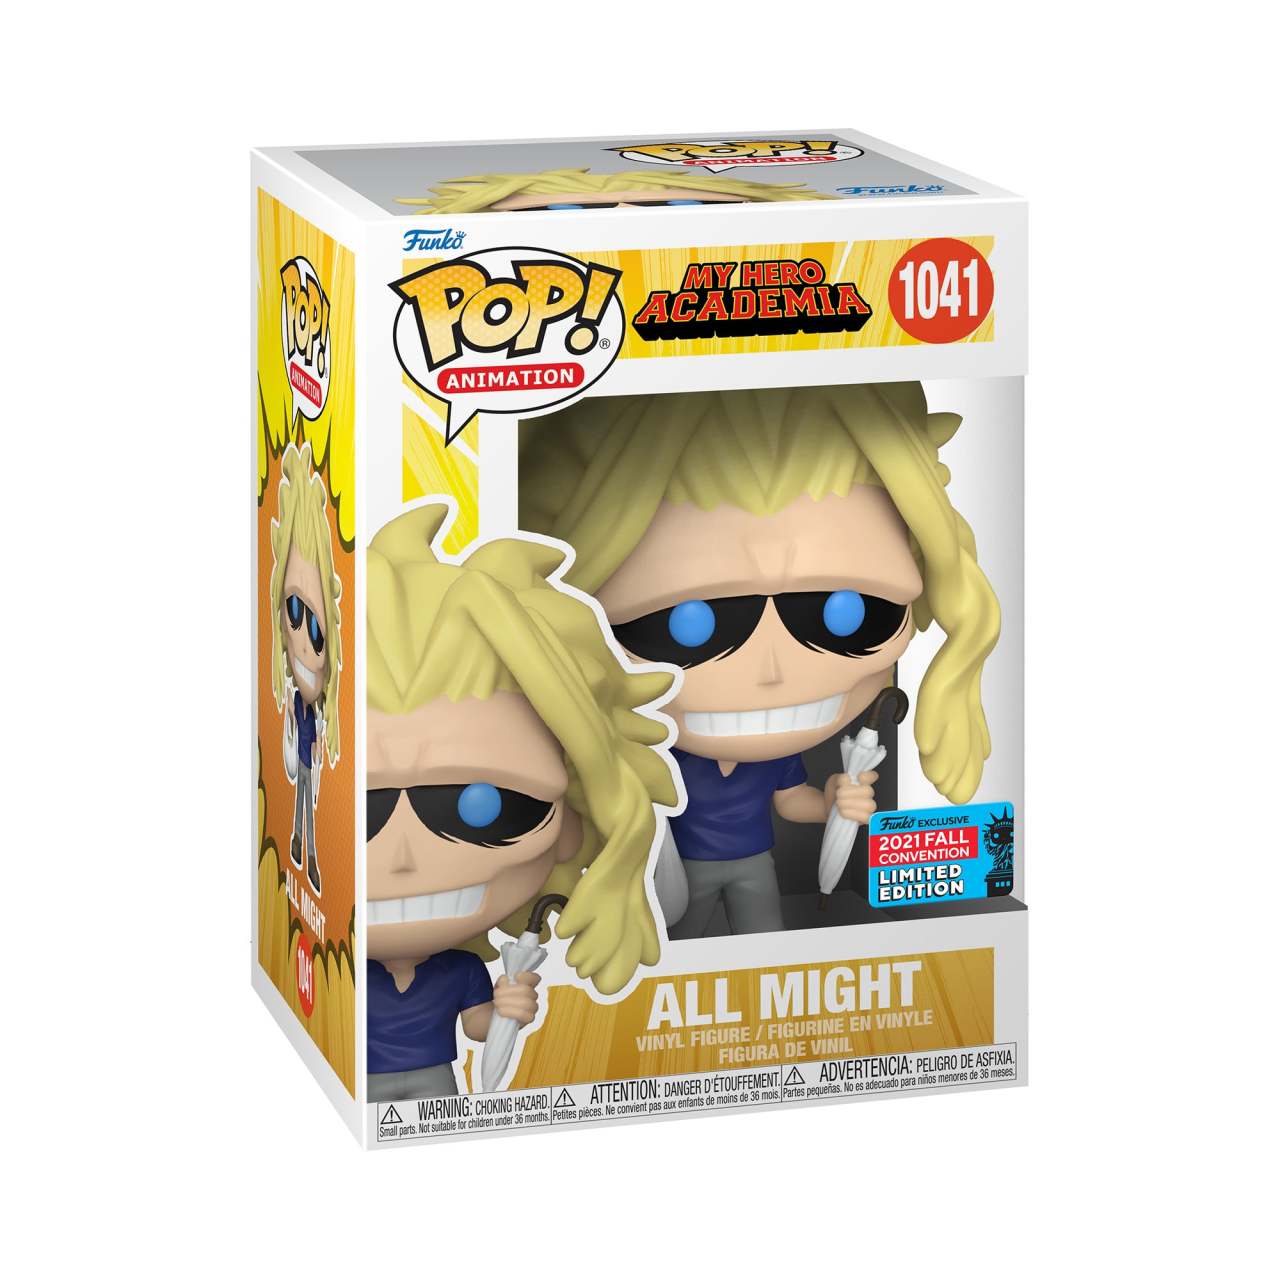 Funko Pop Figür: Animation: My Hero Academia - All Might with Bag & Umbrella 2021 Fall Convention Exclusive Edition